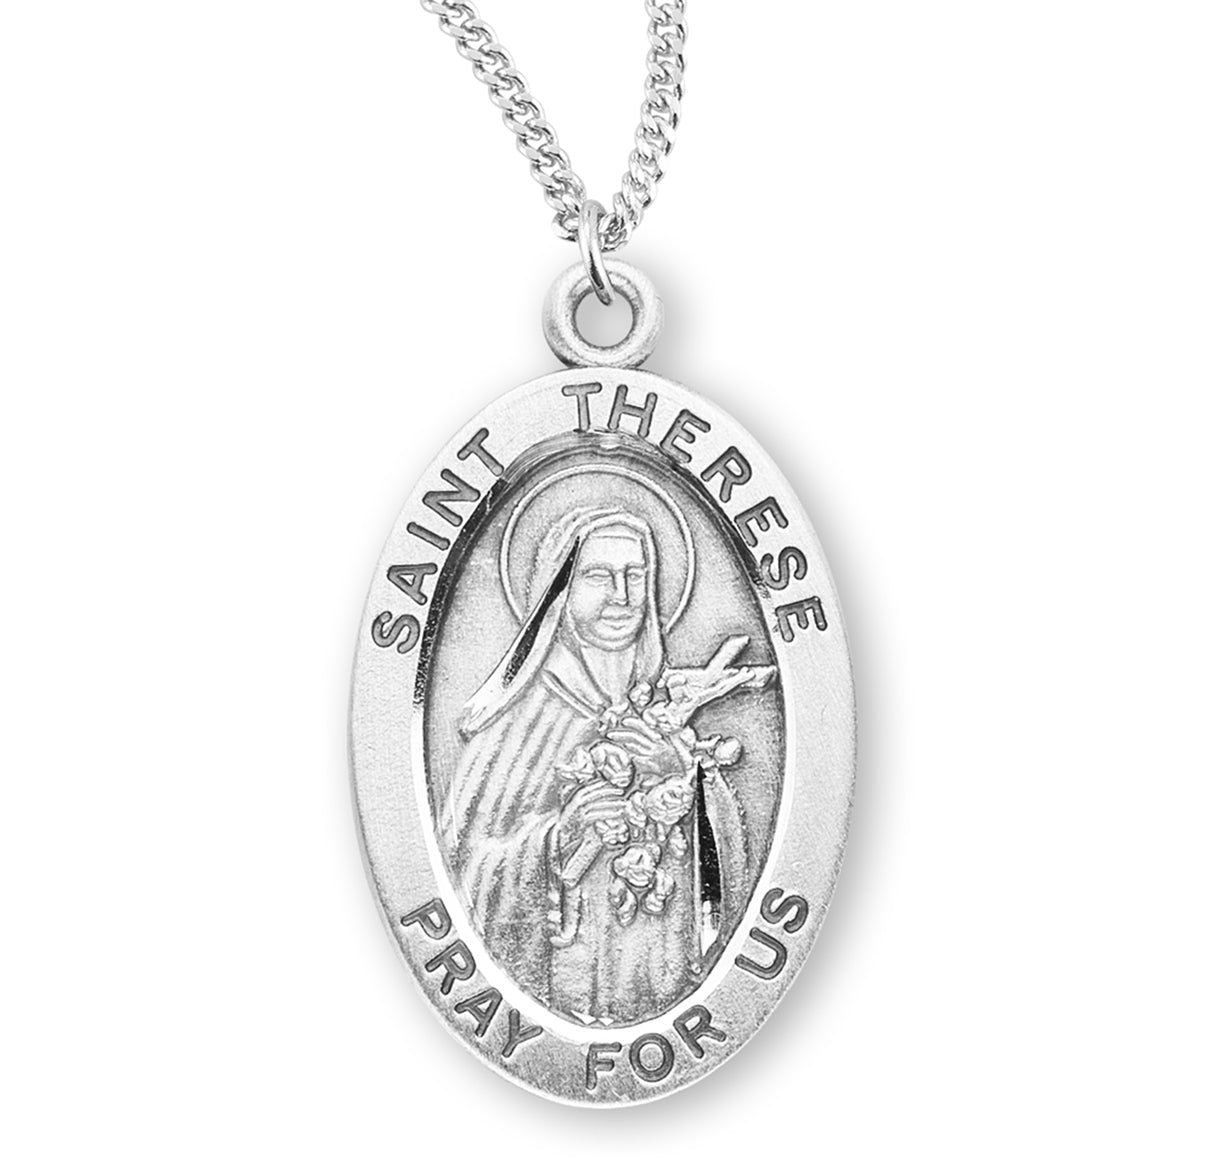 Patron Saint Therese of Lisieux Oval Sterling Silver Medal